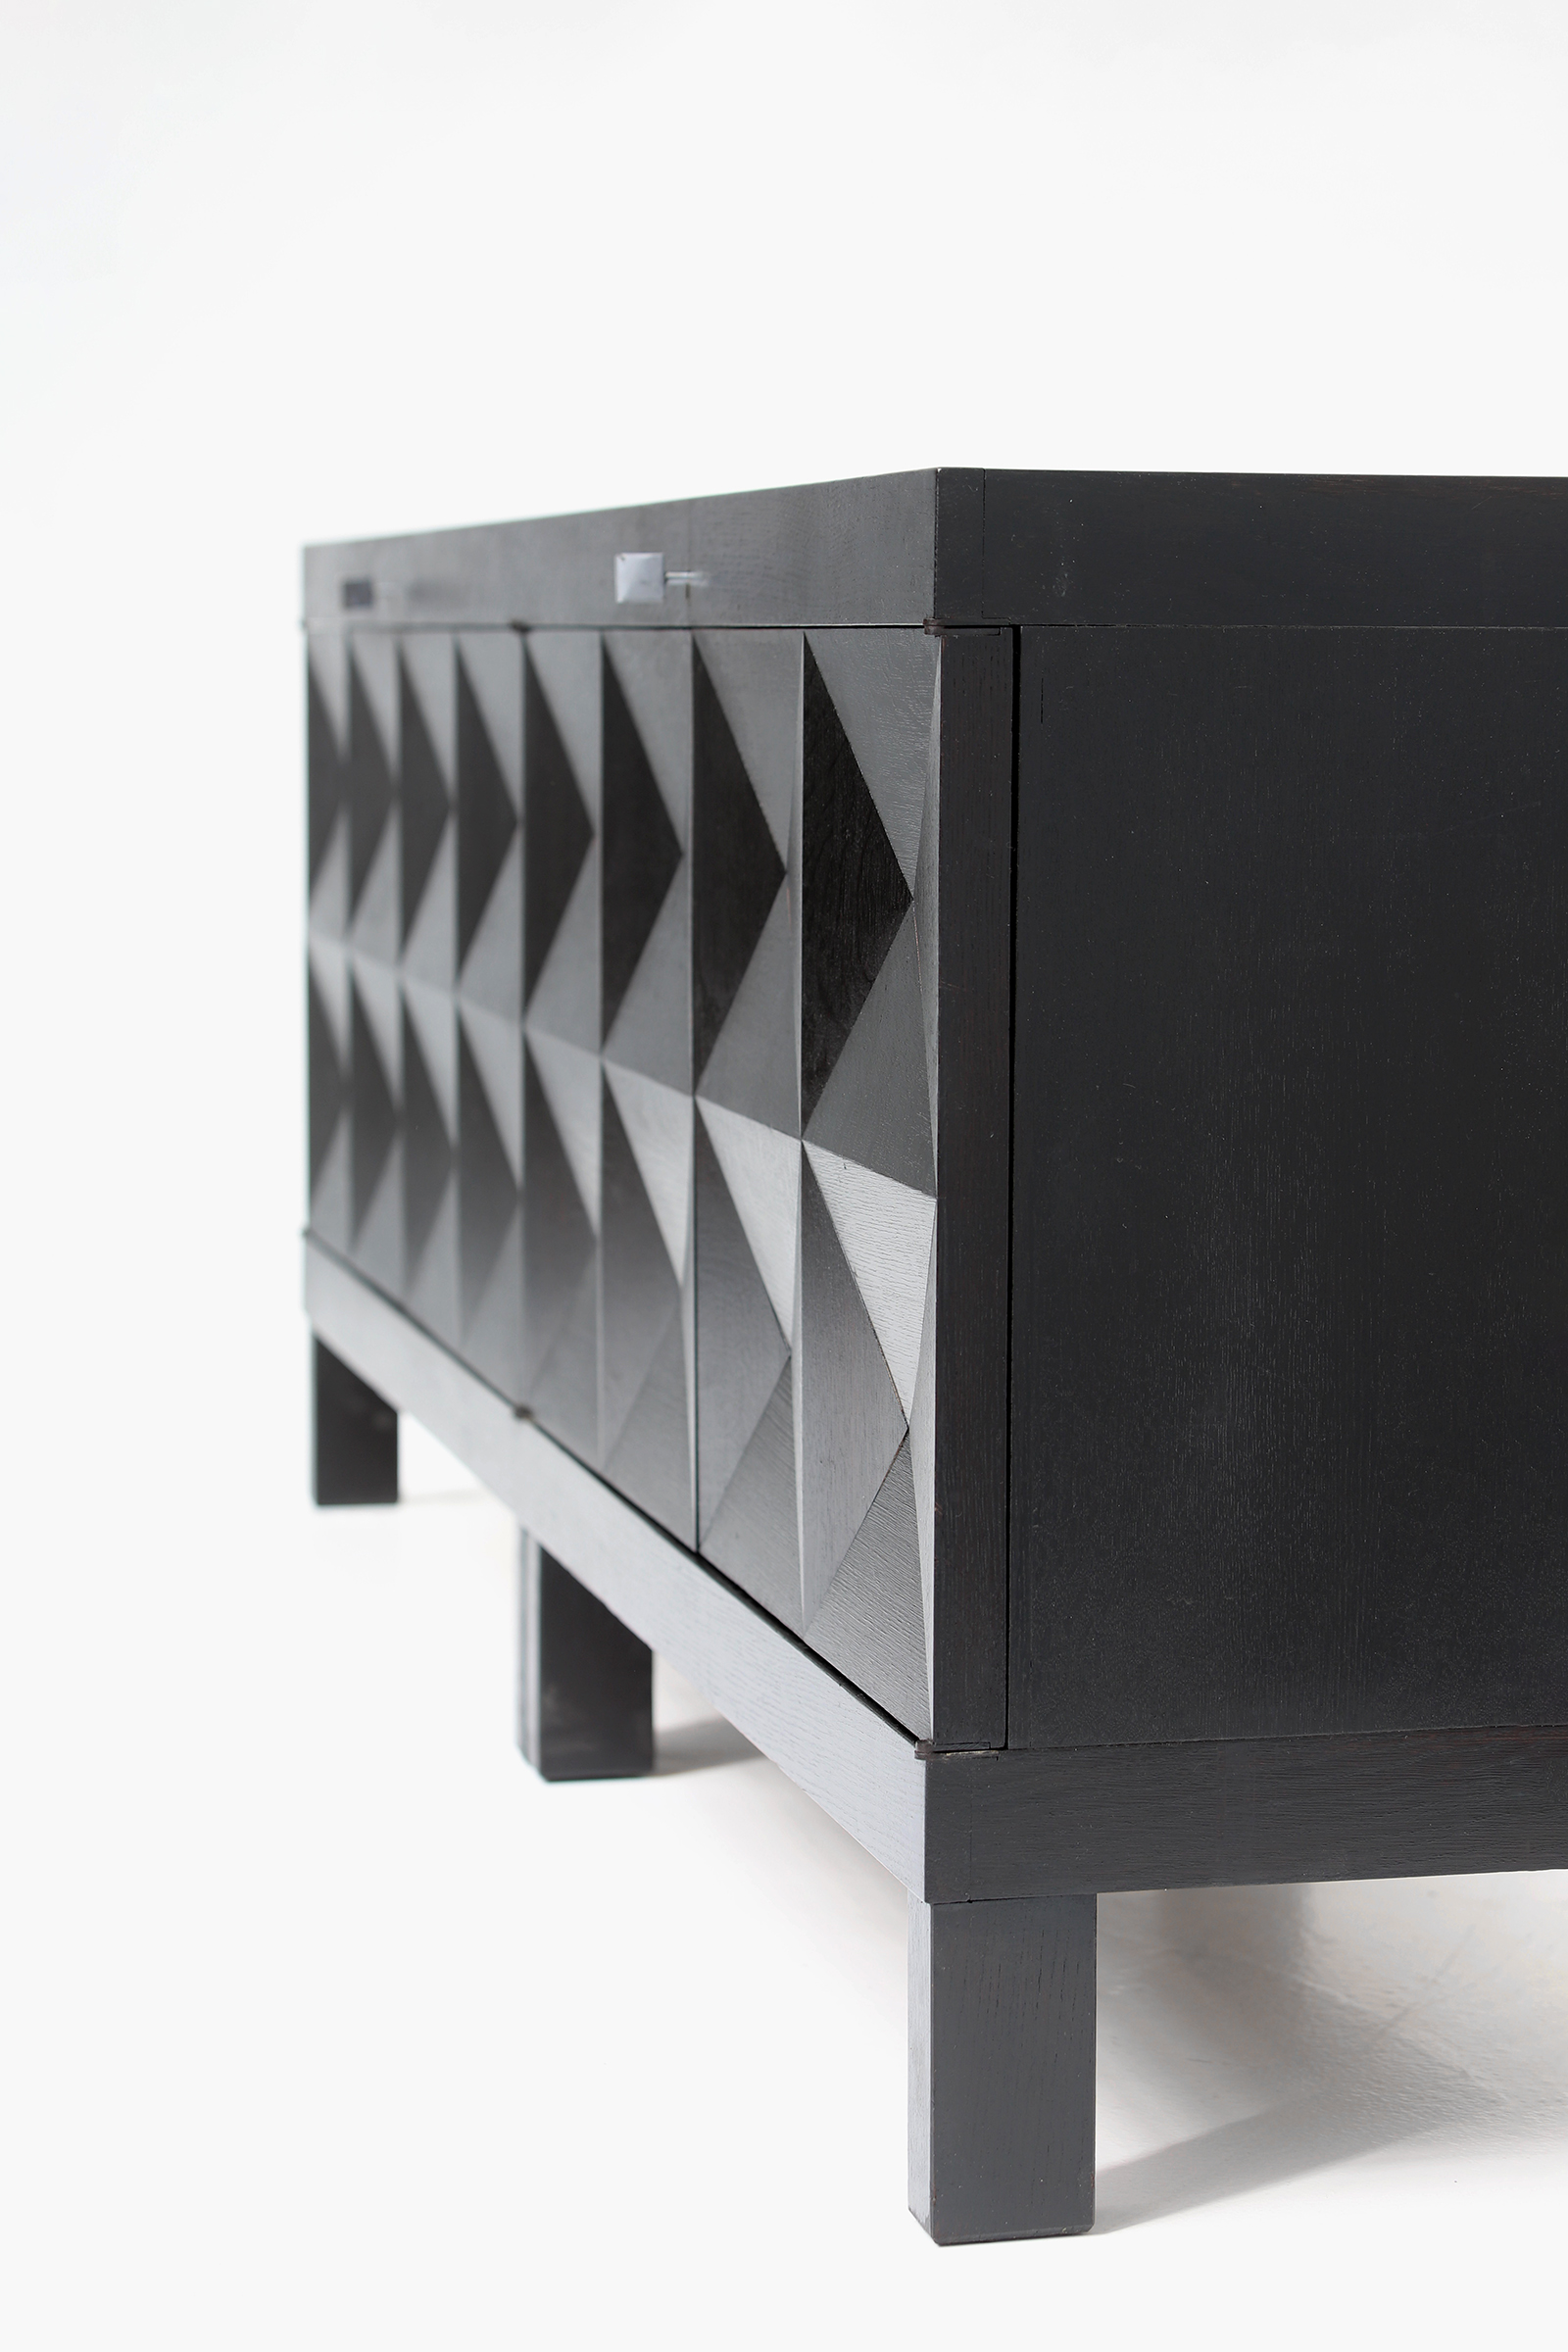 quality crafted sideboard with op-art doors designed by J. Batenburg for MI, Belgium 1969image 10